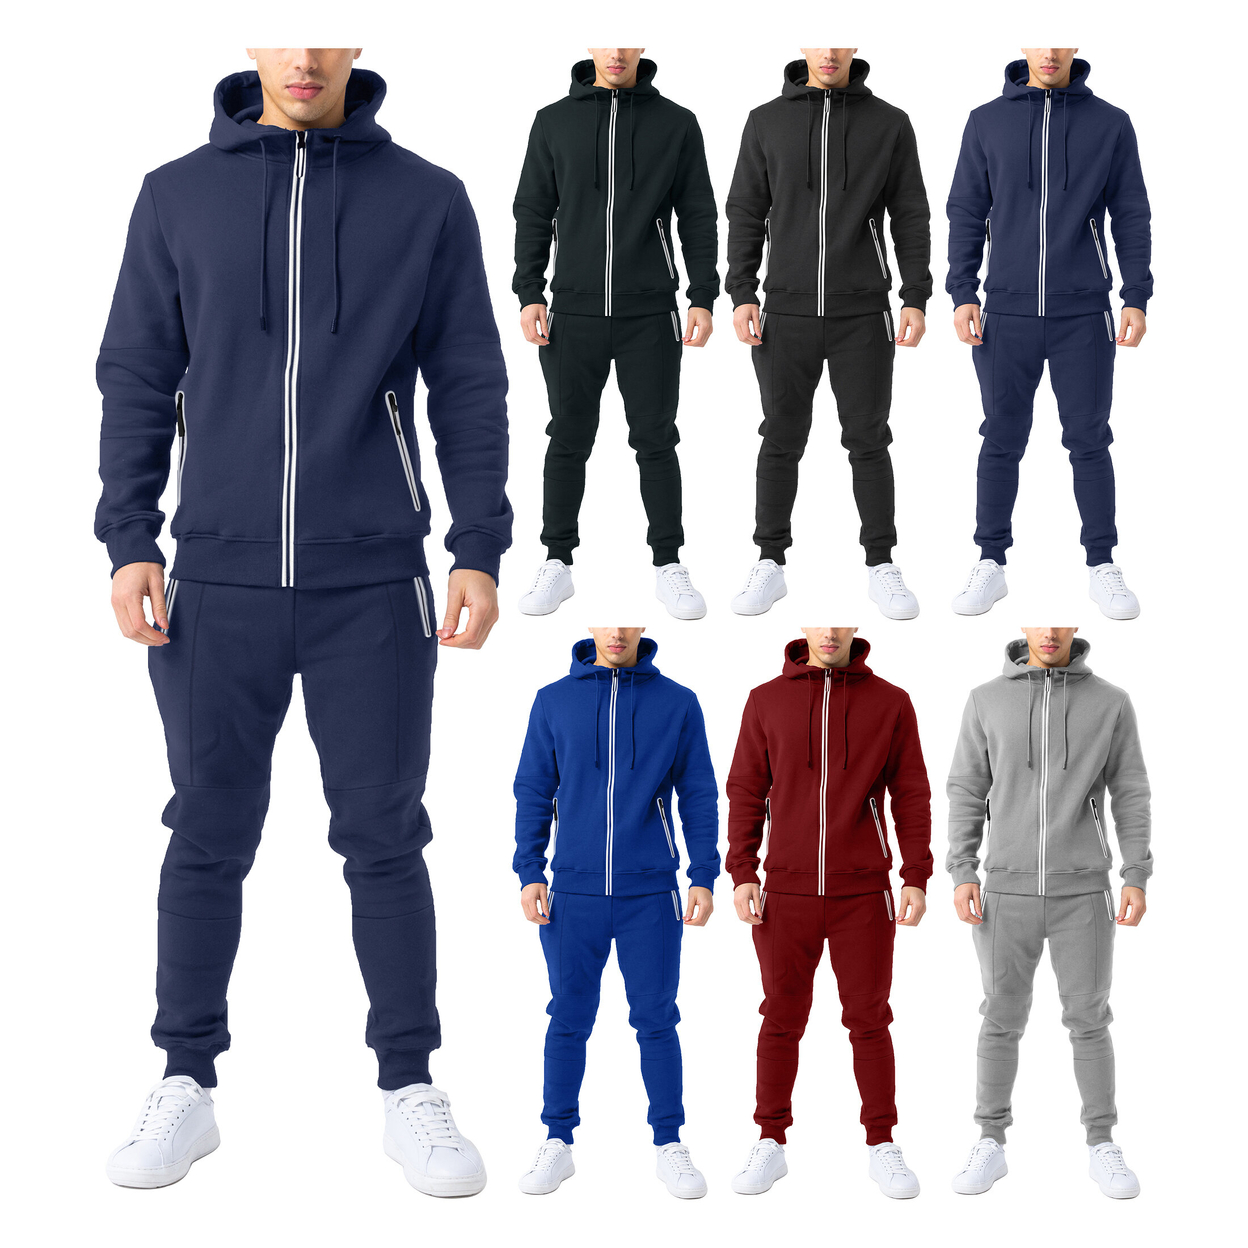 2-Pack: Men's Cozy Slim Fit Active Athletic Full Zip Hoodie And Jogger Tracksuit - Black & Blue, Xx-large